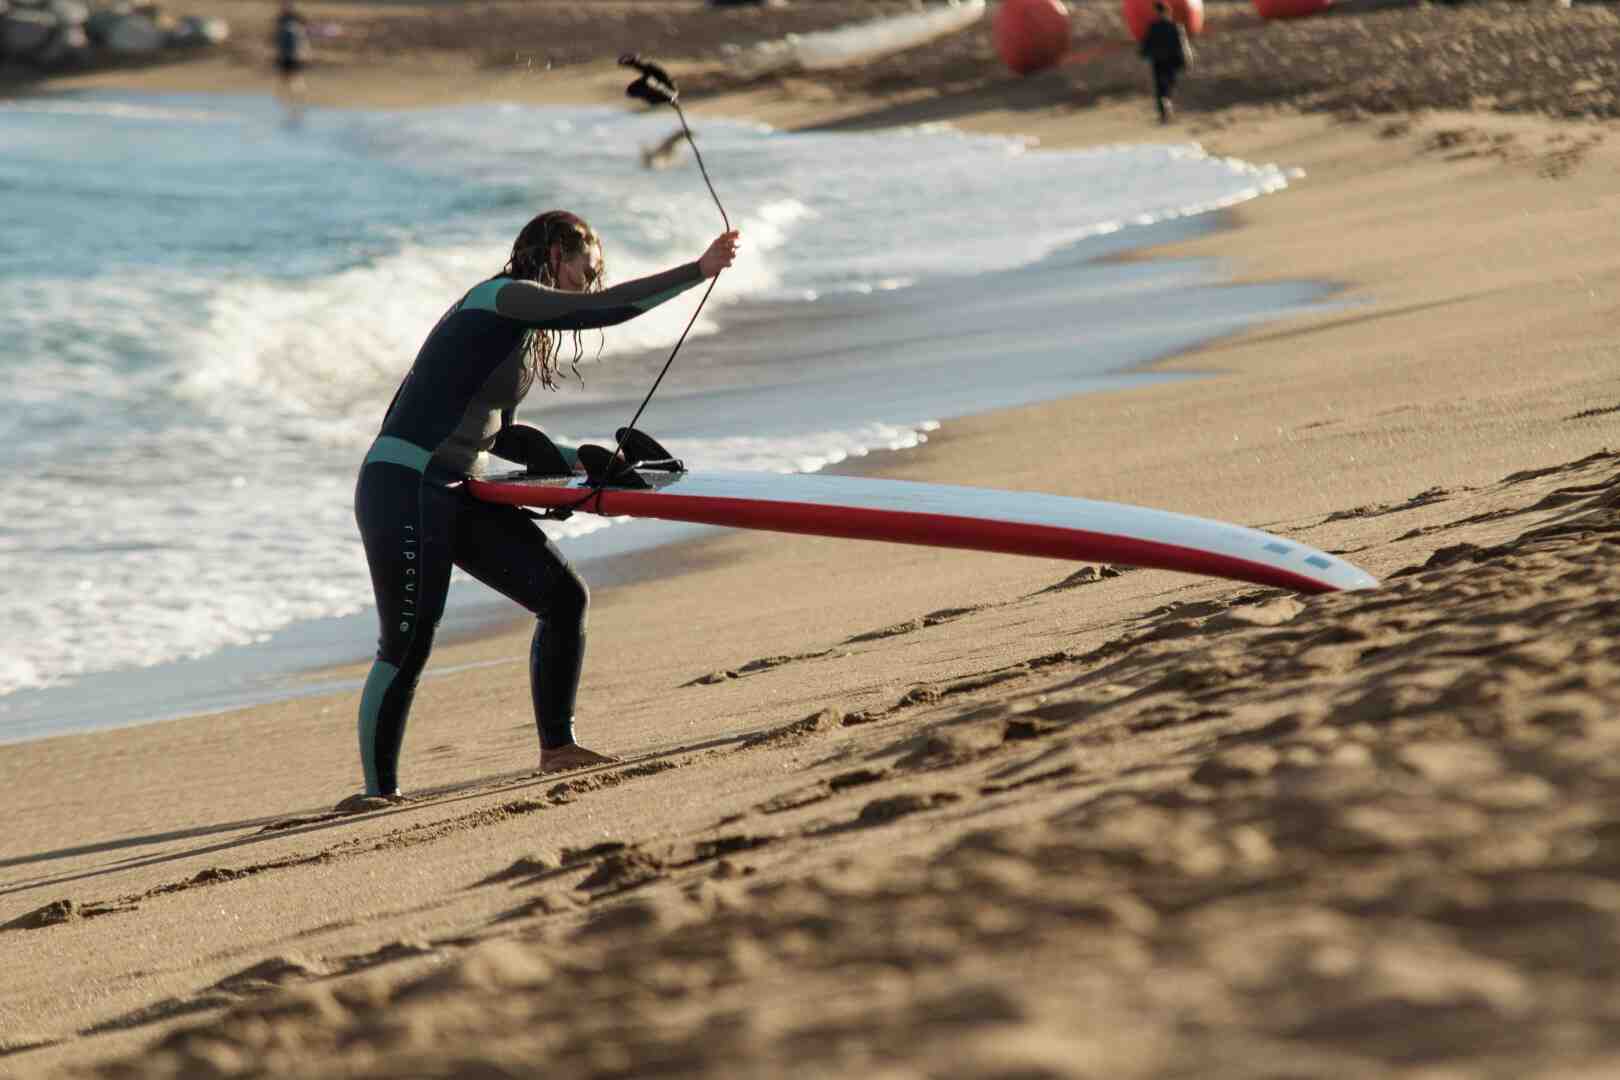 Do surfers get injured a lot?